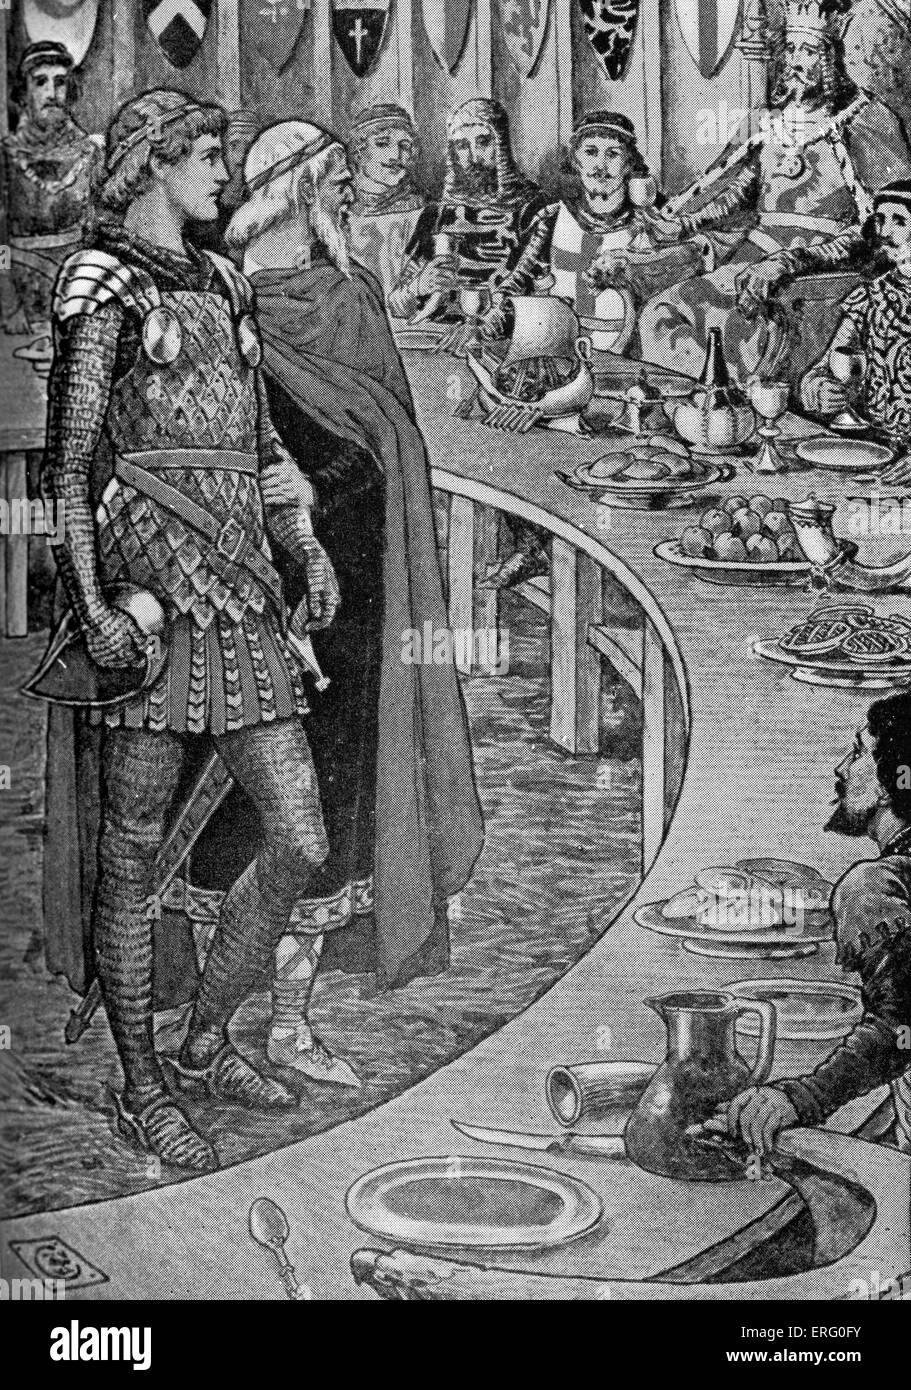 King Arthur- An old man presents Sir Galahad to King Arthur, from the painting by Walter Crane. Galahad takes the vacant seat, Stock Photo